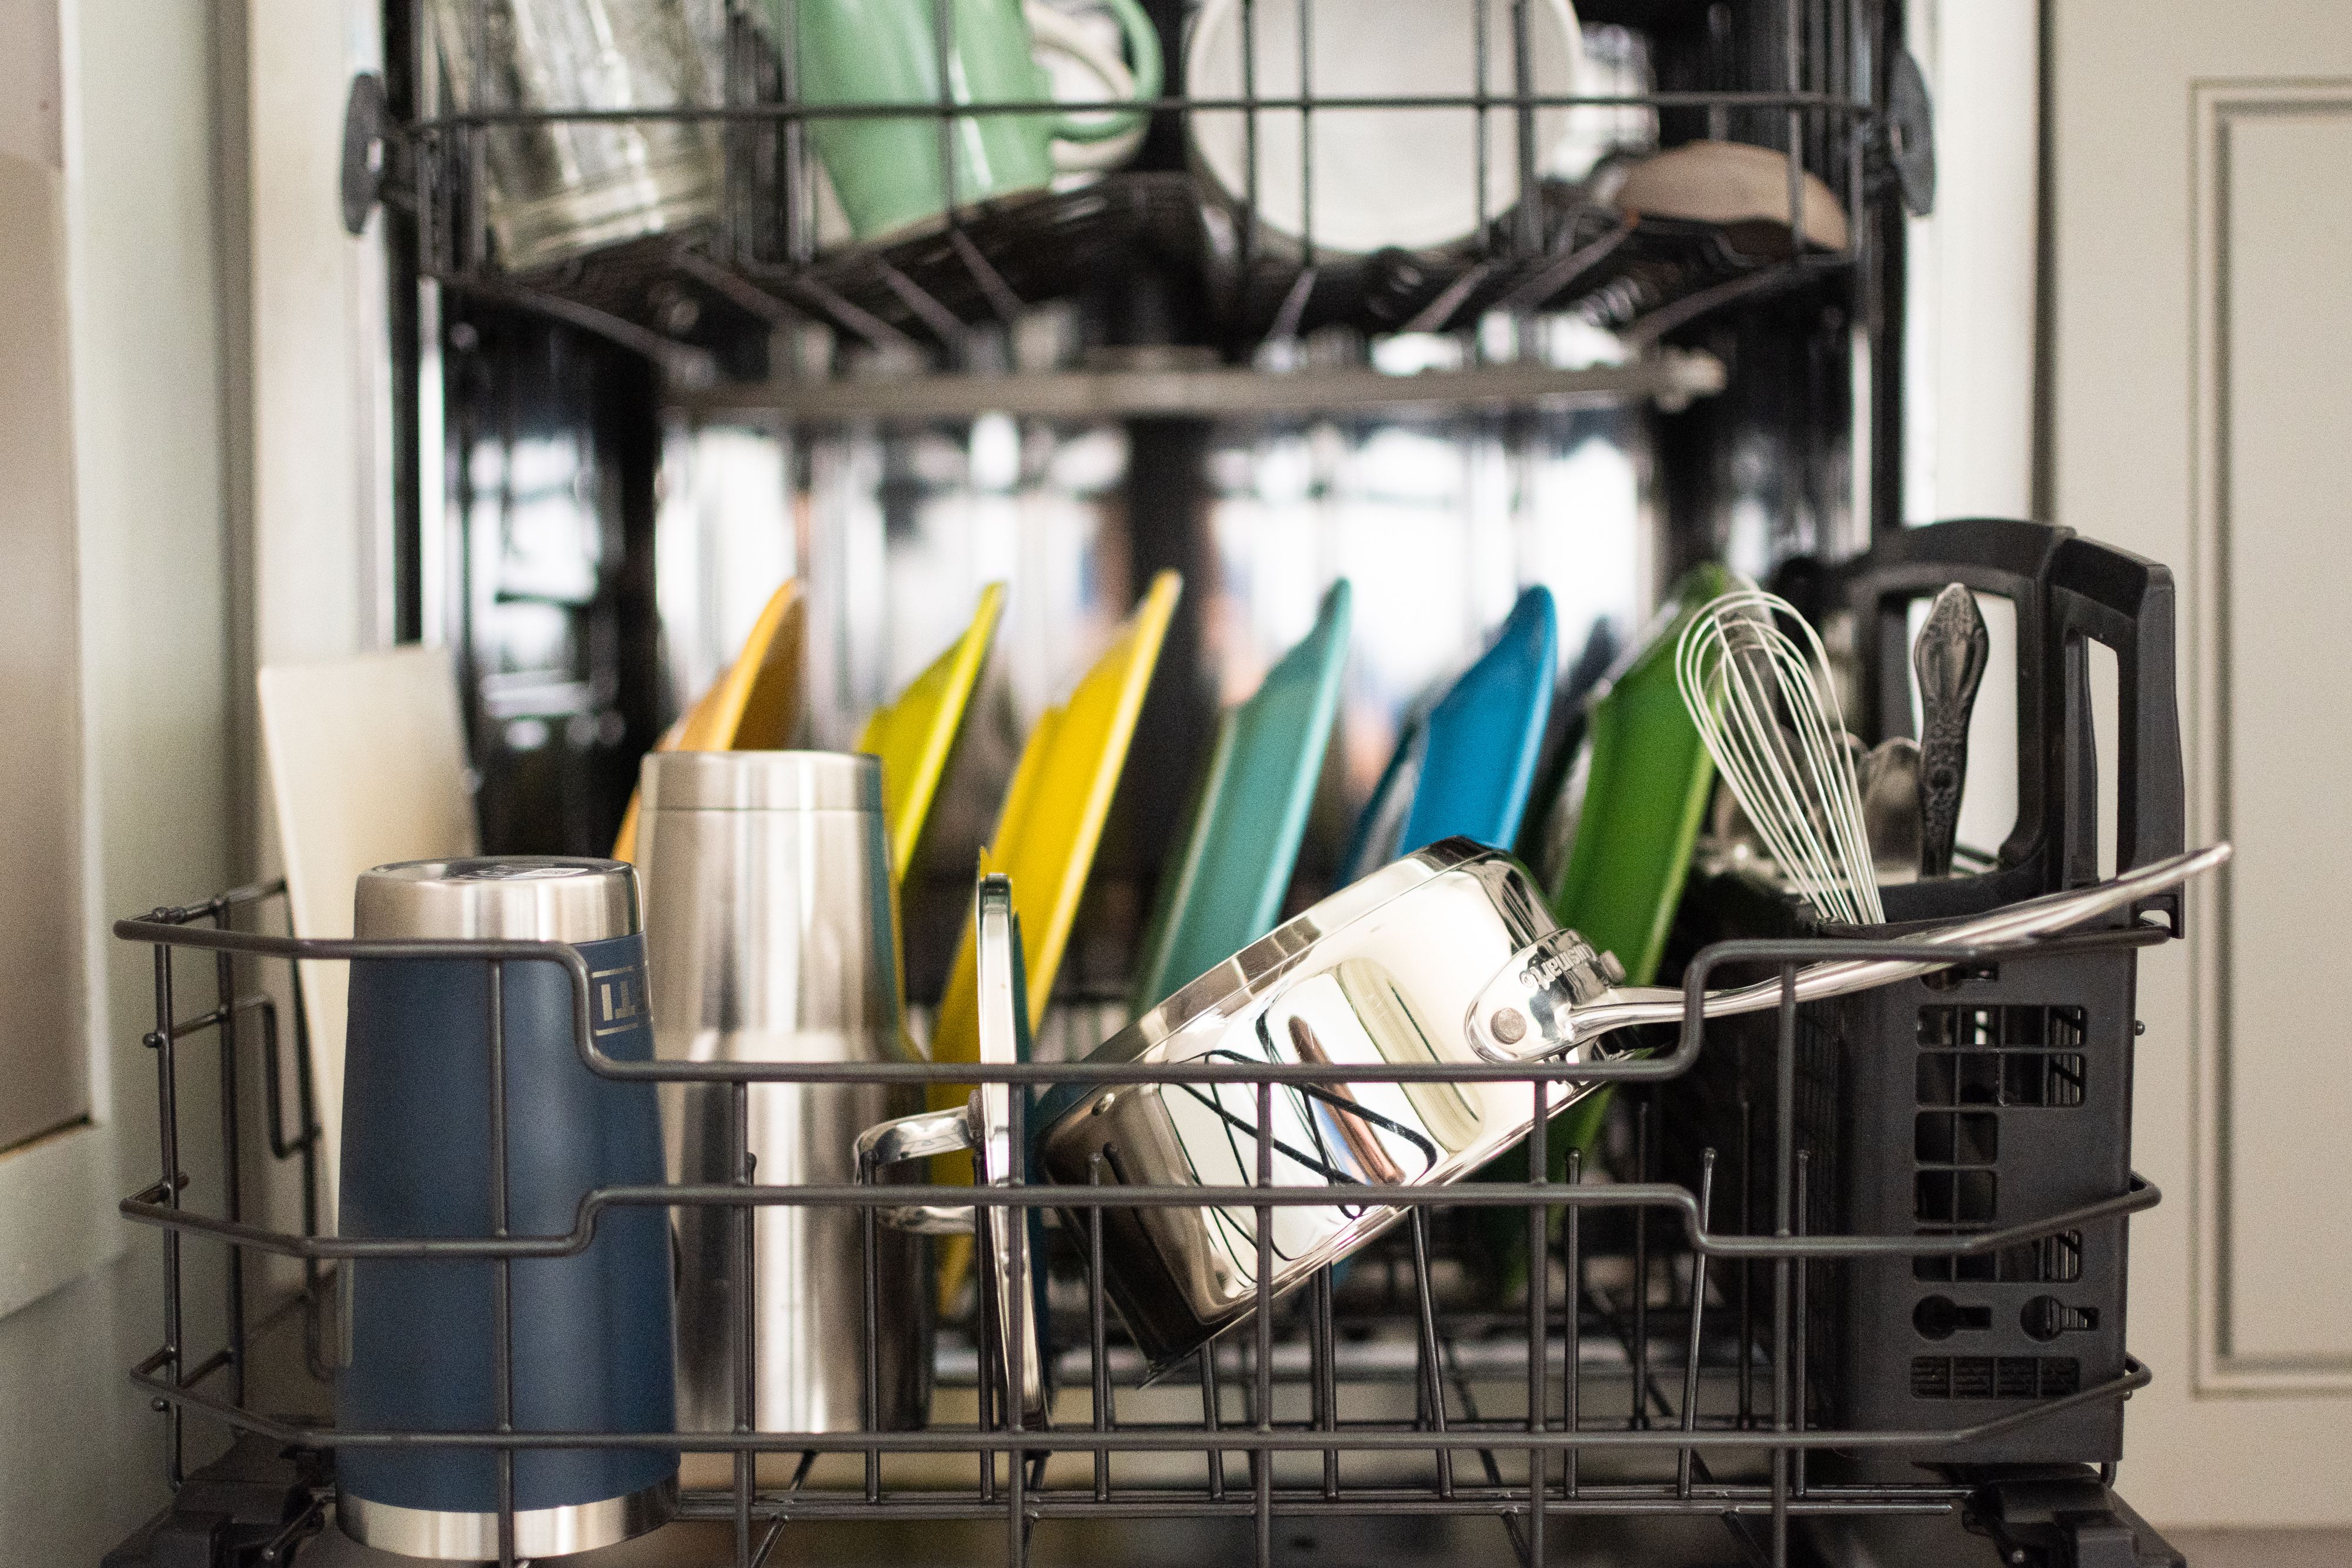 18 Things You Should Never Put in Your Dishwasher